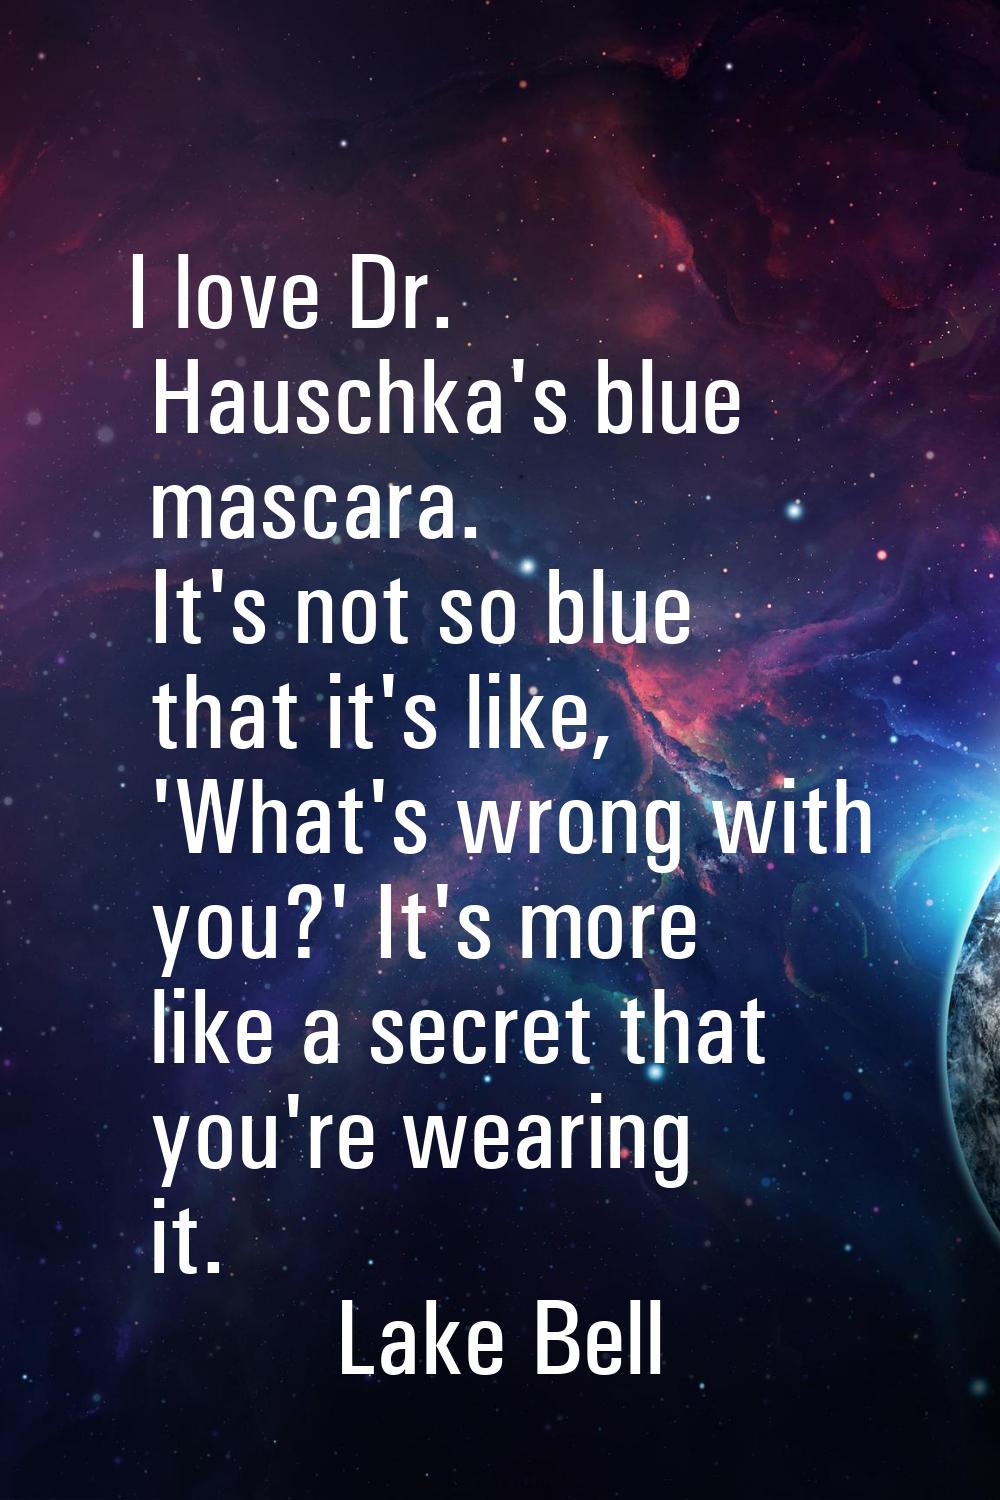 I love Dr. Hauschka's blue mascara. It's not so blue that it's like, 'What's wrong with you?' It's 